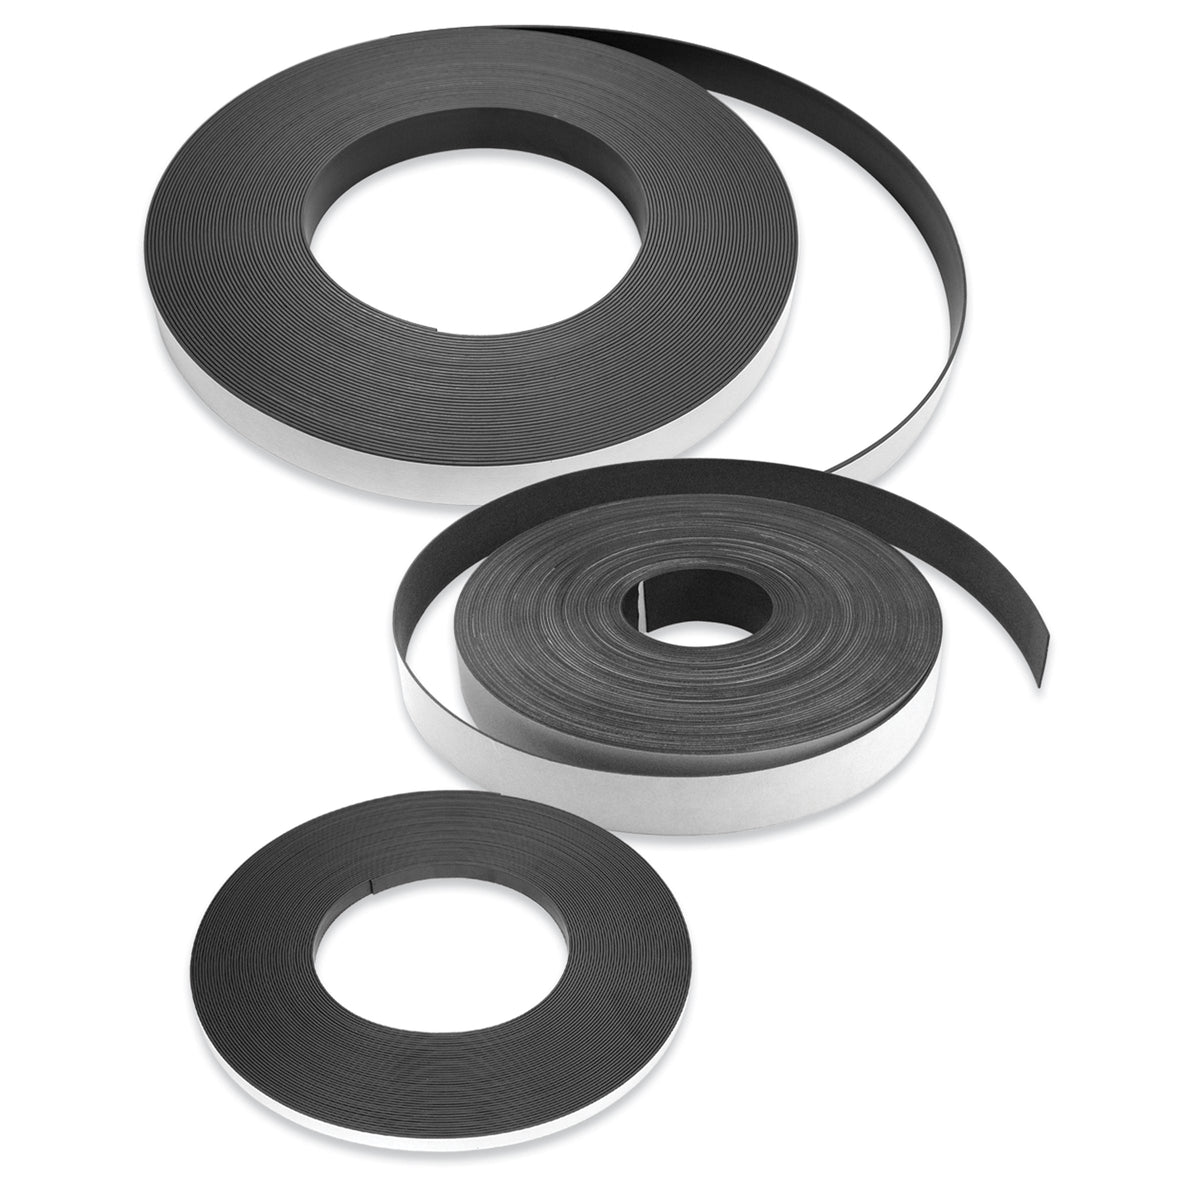 Magnet Strips with Adhesive Backing - Flat Thin Magnetic Tape for Crafts NEW